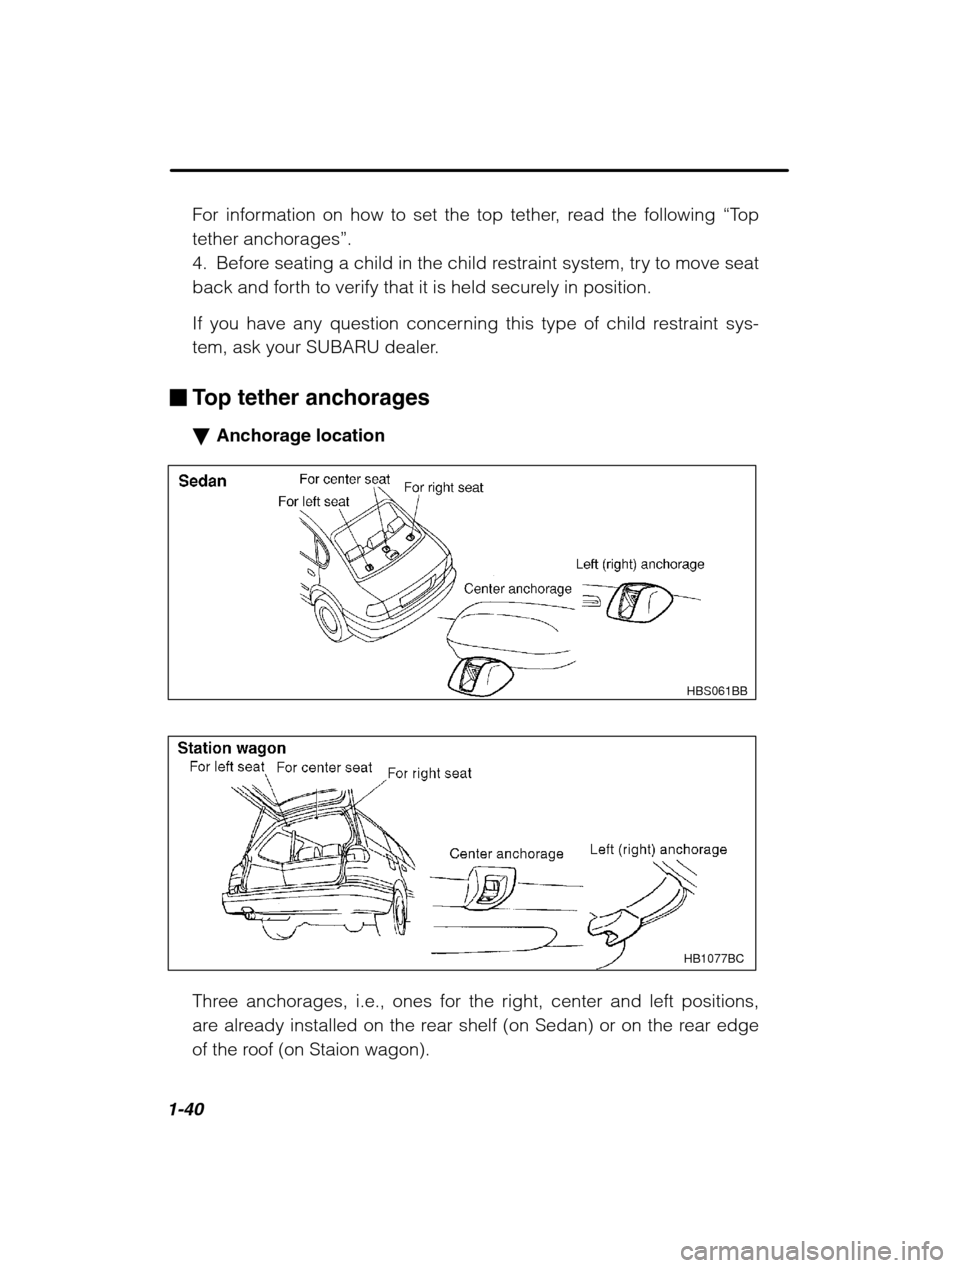 SUBARU OUTBACK 2002 3.G Owners Manual 1-40
For information on how to set the top tether, read the following “To p
tether anchorages ”.
4. Before seating a child in the child restraint system, try to move seat 
back and forth to verify